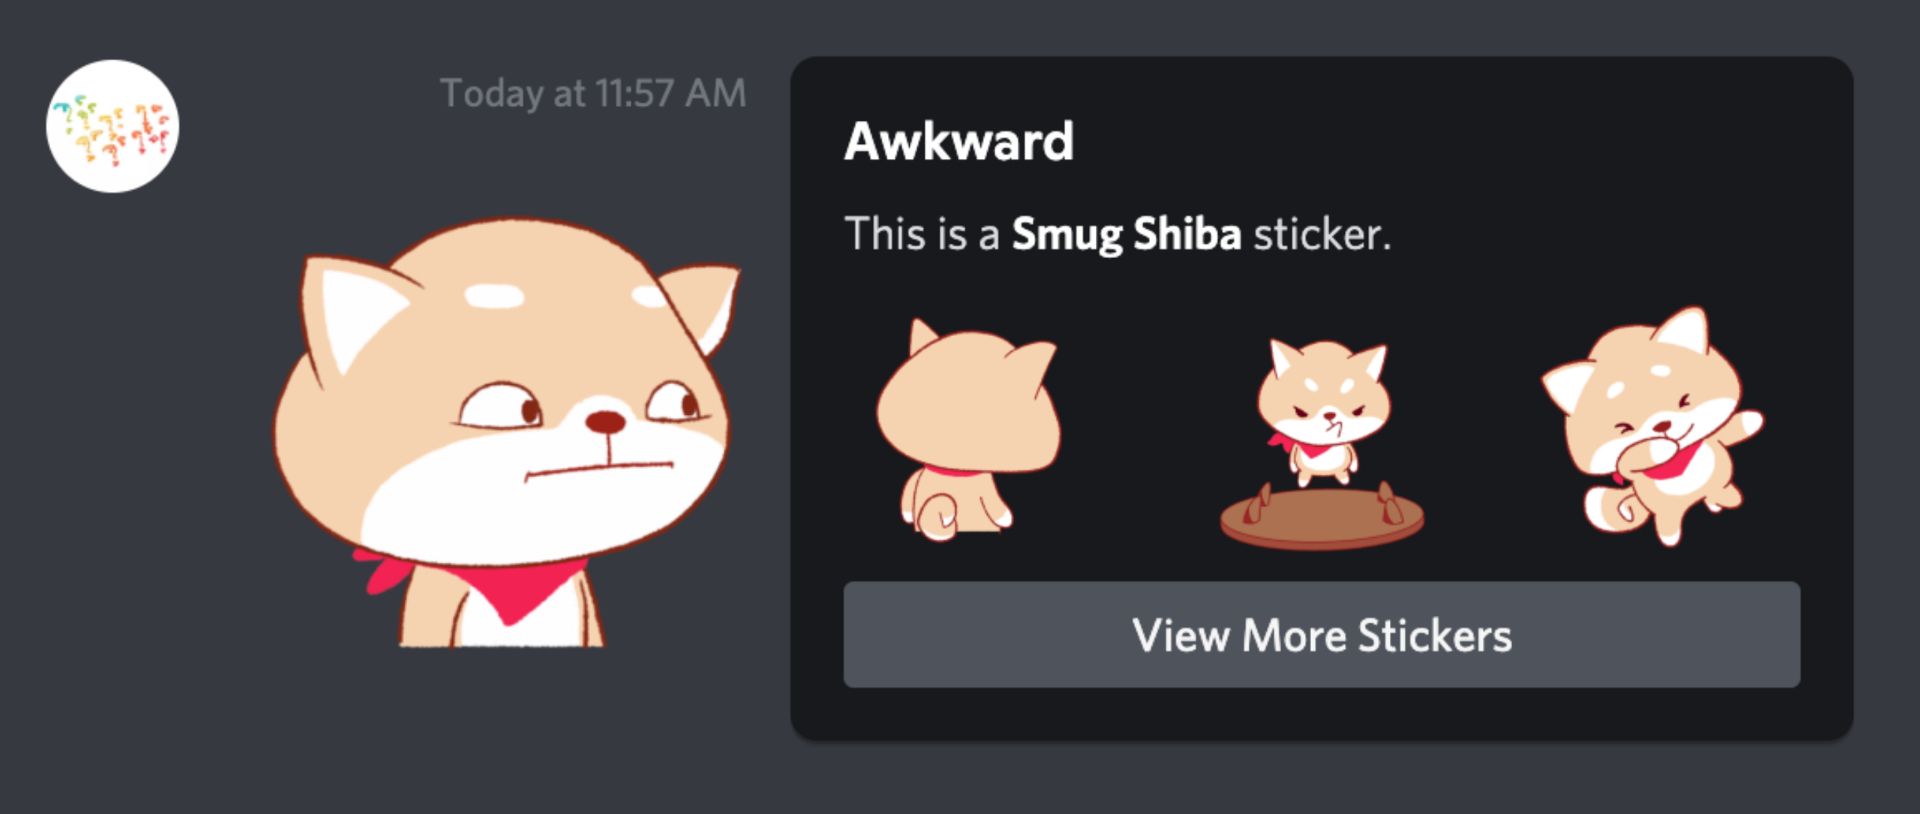 A screenshot of the Awkward Smug Shiba sticker posted in a Discord channel. 